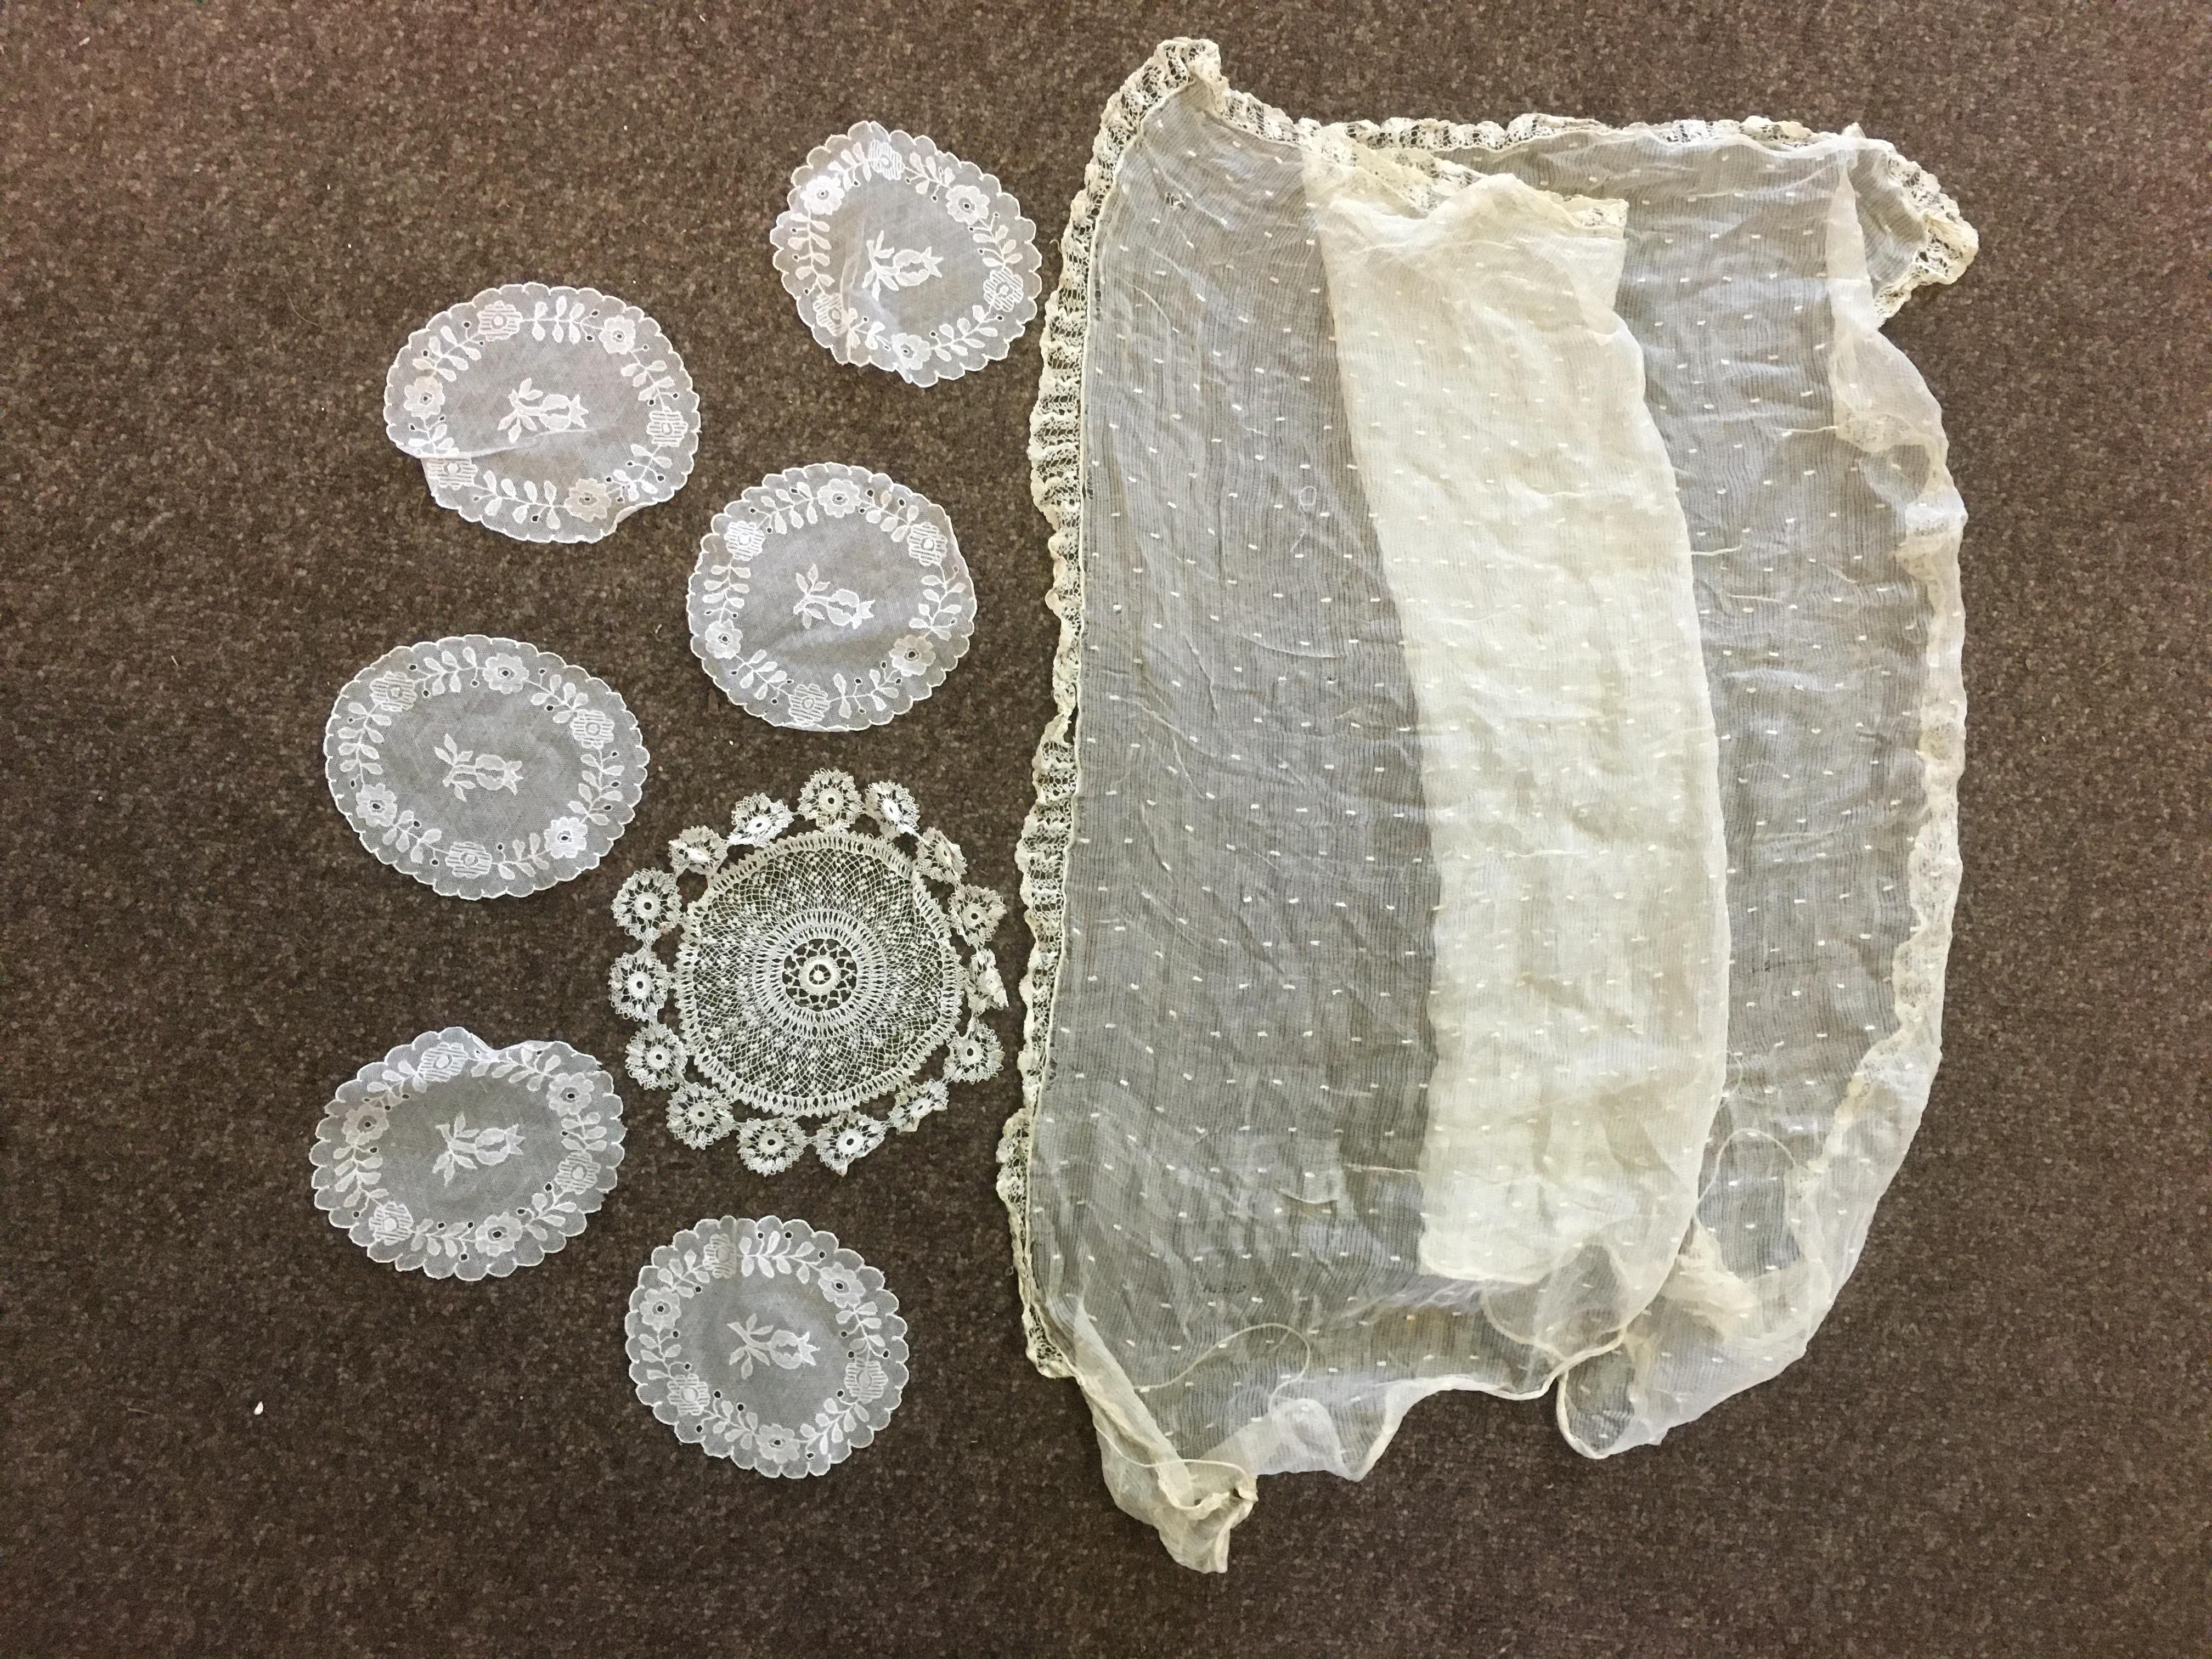 VINTAGE LACE a collection of 19thc lace, comprising collars, a fine shawl, a small applique lace - Image 7 of 8